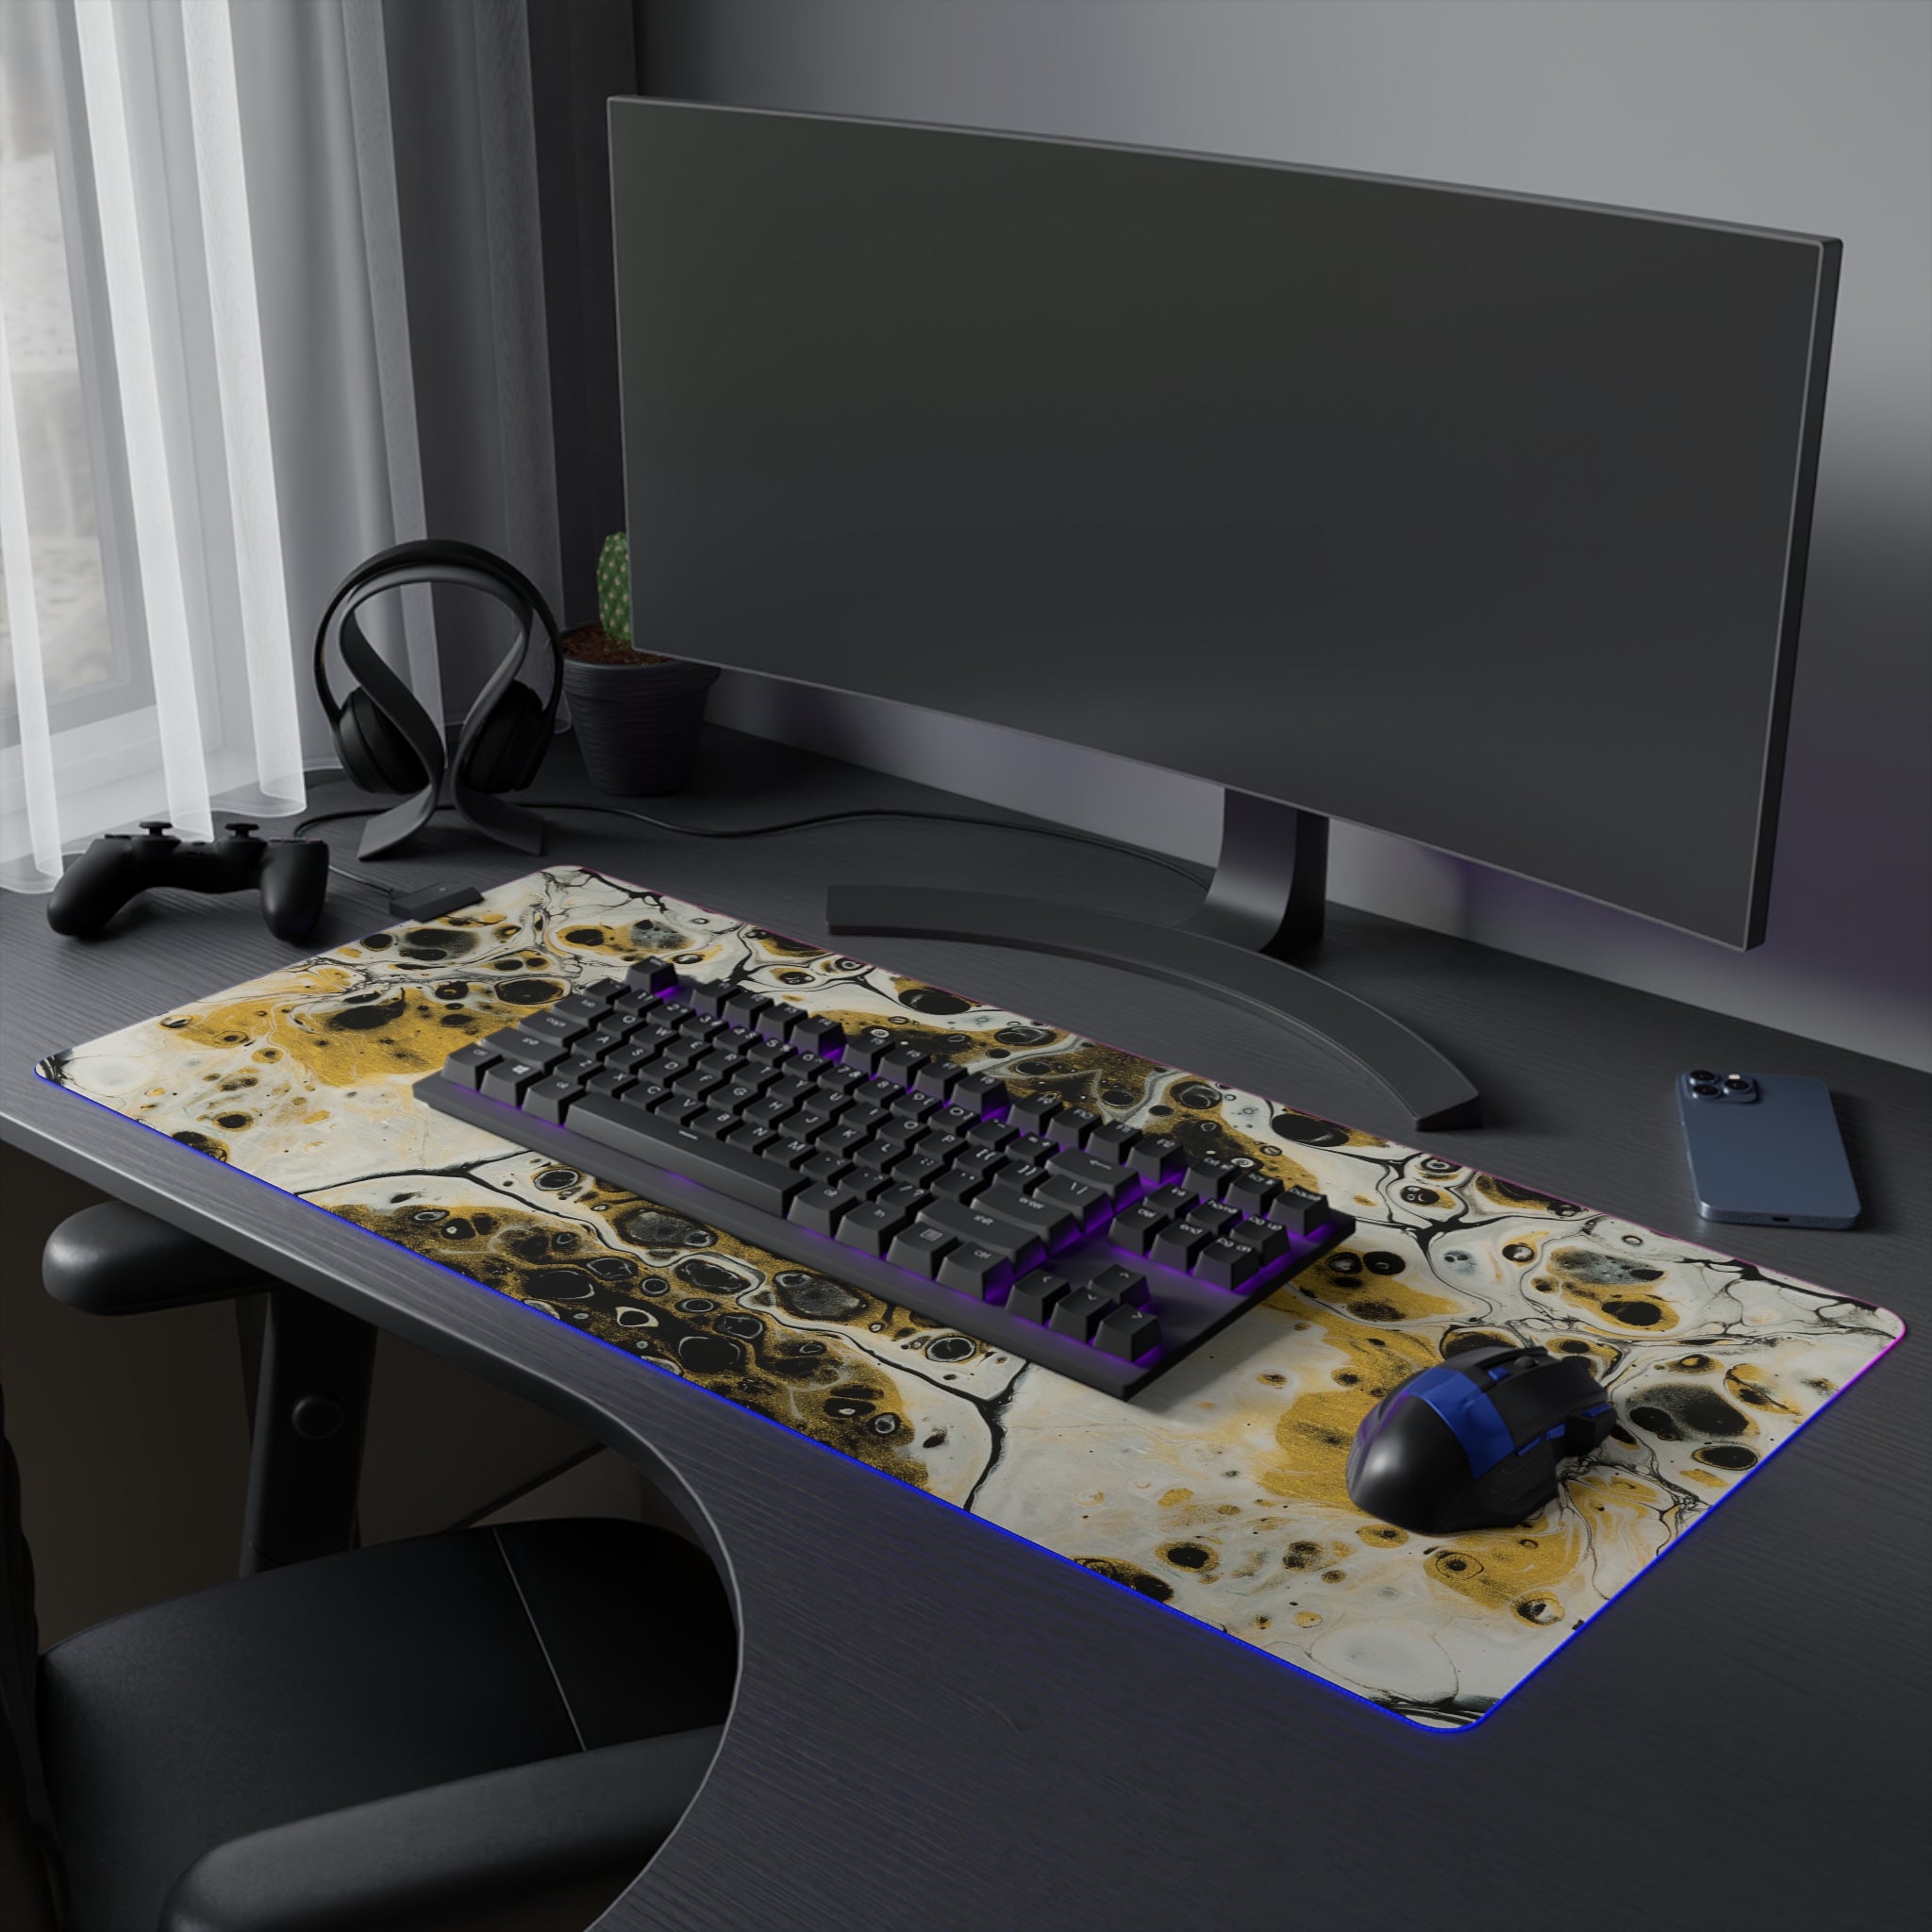 Cameron Creations - LED Gaming Mouse Pad - Golden Ghosts - Concept 1